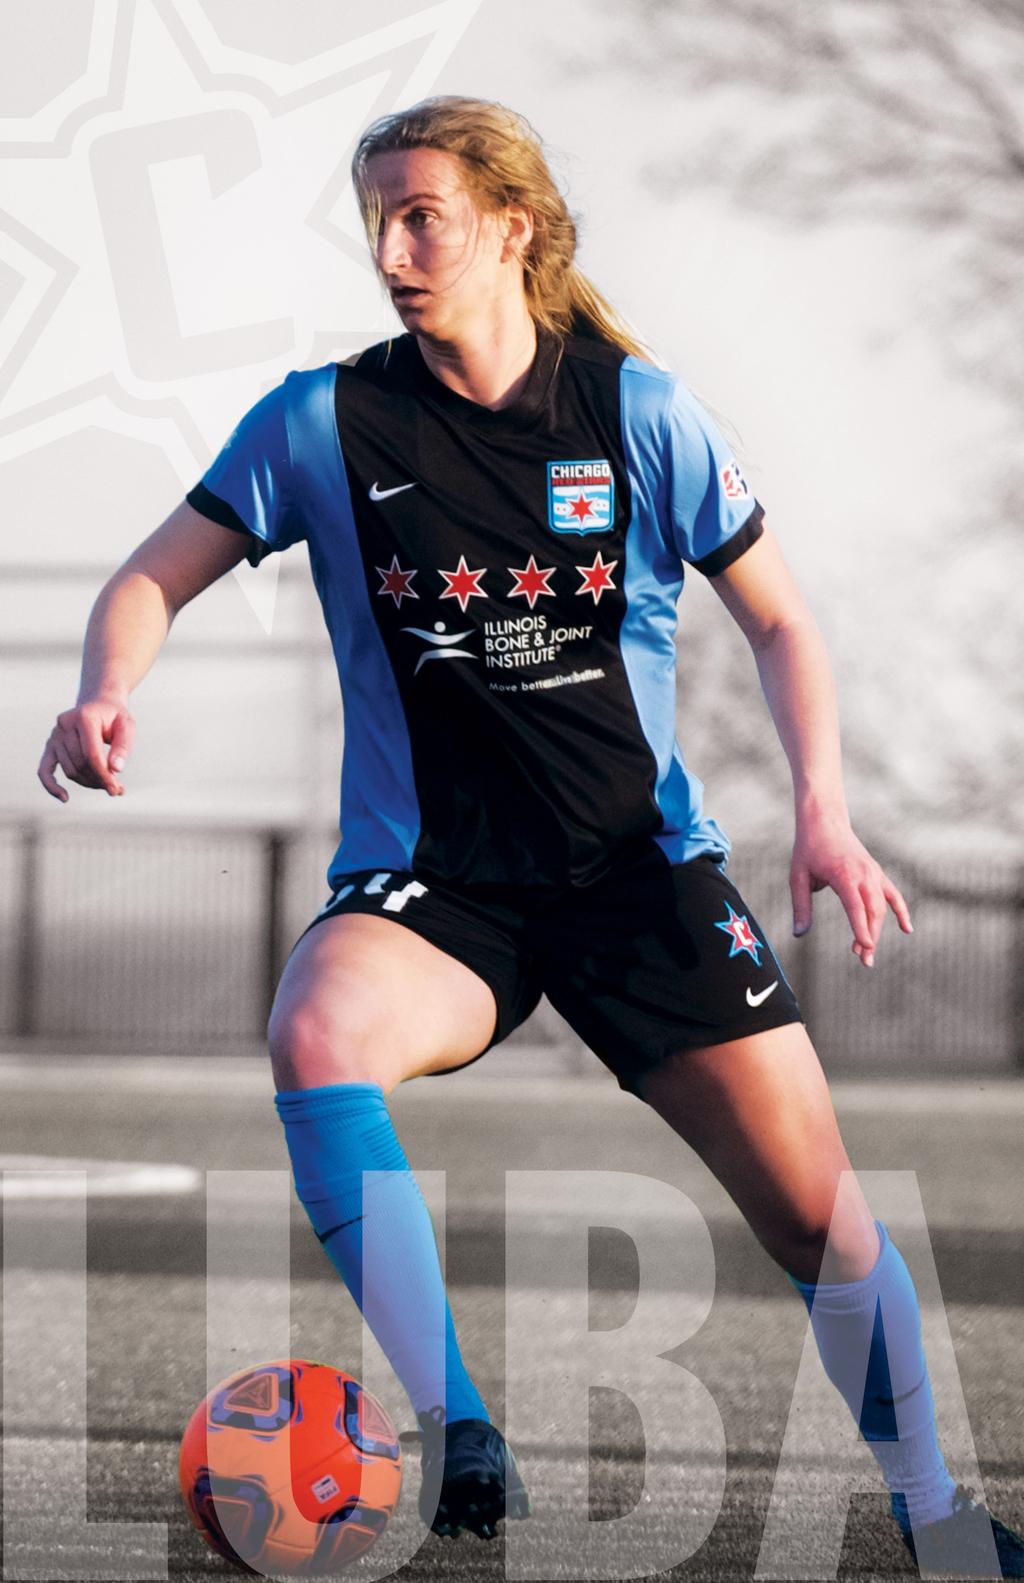 34Mary Luba POSITION: MIDFIELDER HEIGHT: 5-8 BORN: AUGUST 20, 1993 HOMETOWN: SHOREWOOD, WI COLLEGE: MARQUETTE UNIVERSITY INTERNATIONAL: 2014: Invited to U-23 USWNT summer training sessions.